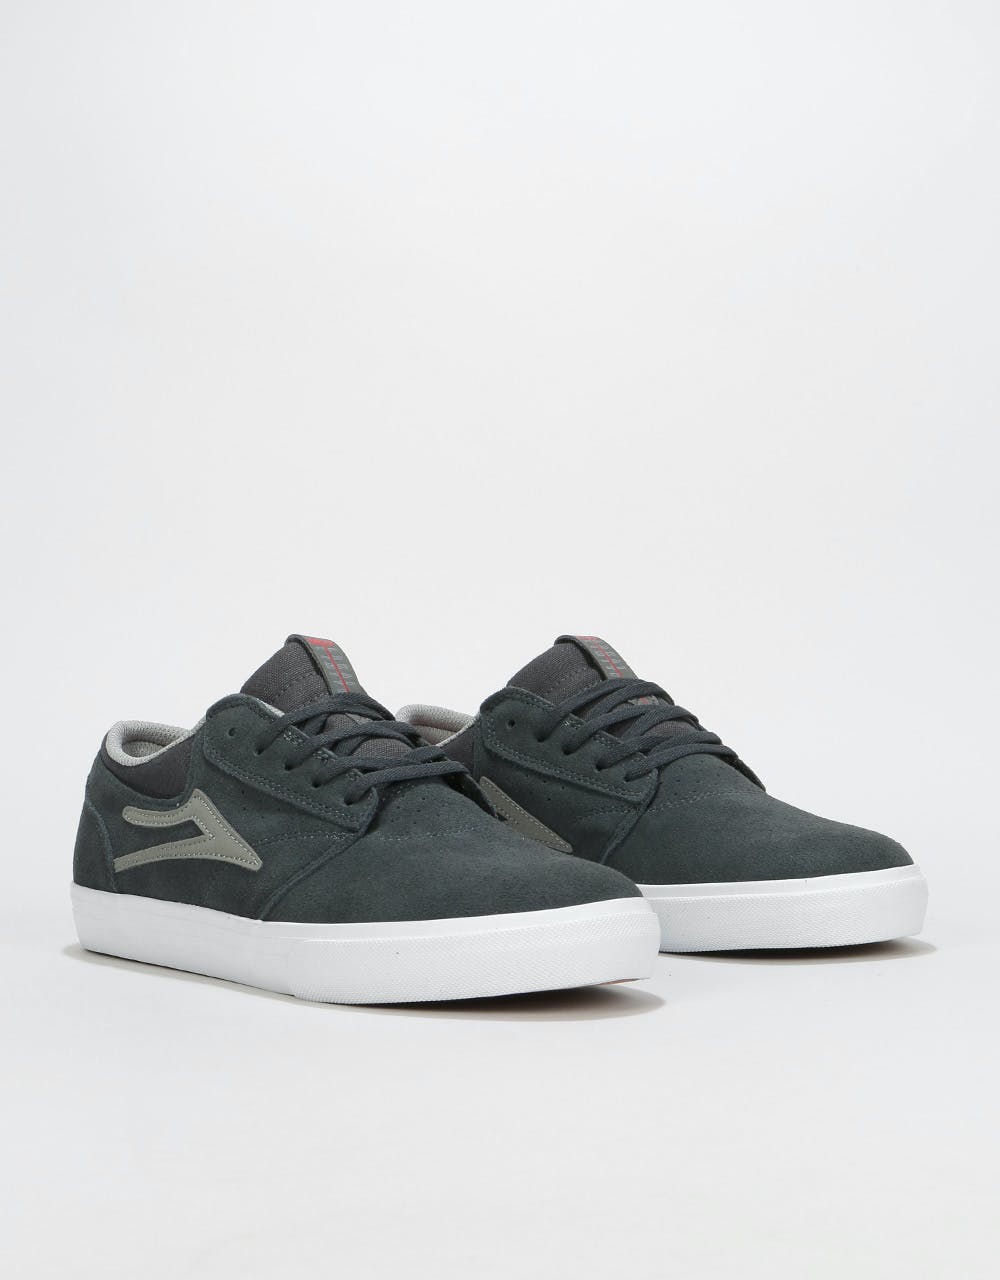 Lakai Griffin Skate Shoes - Charcoal Suede